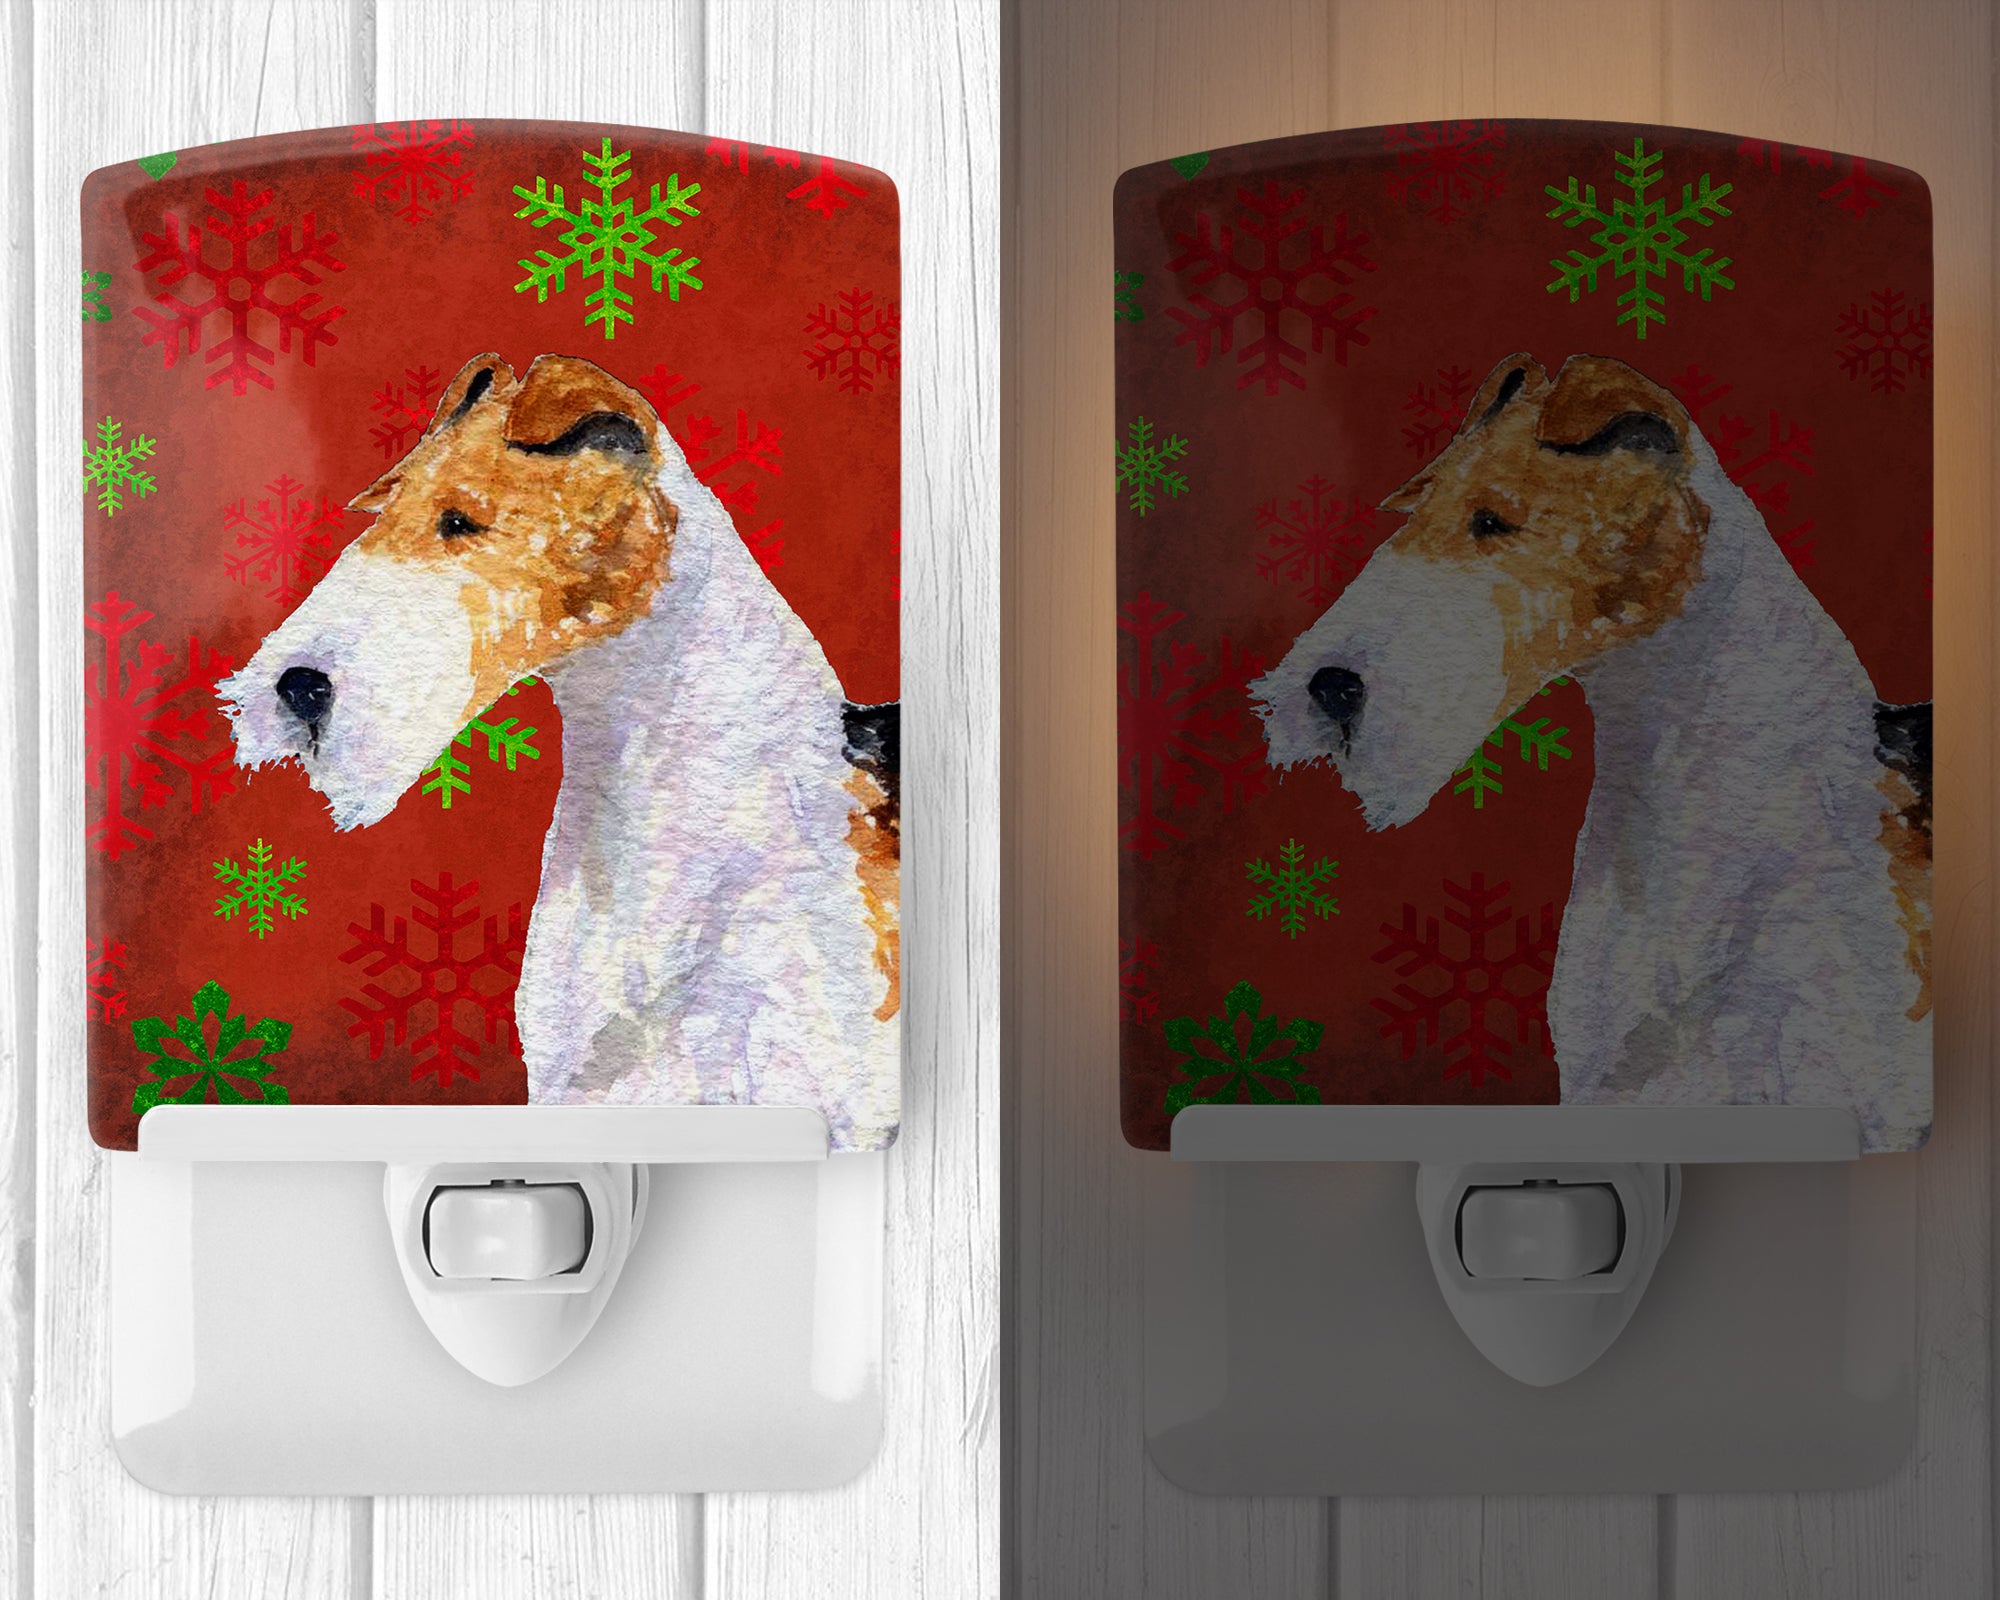 Fox Terrier Red and Green Snowflakes Holiday Christmas Ceramic Night Light SS4685CNL - the-store.com